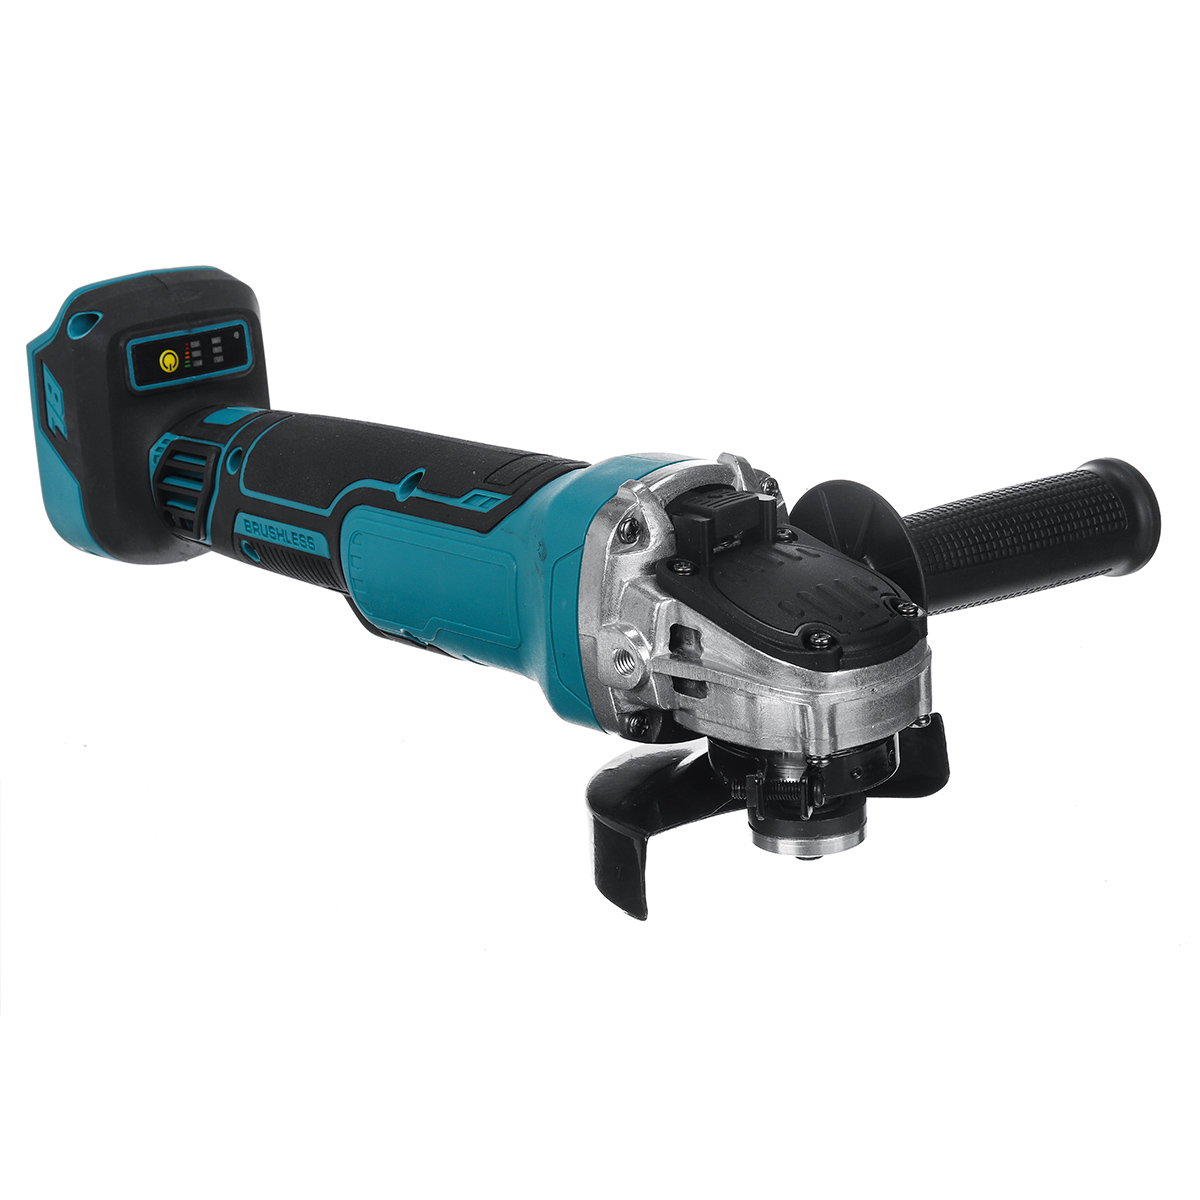 Drillpro-388VF-100mm125mm-Brushless-Angle-Grinder-Rechargeable-Electric-Cutting-Grinding-Tool-W-12-B-1861855-10